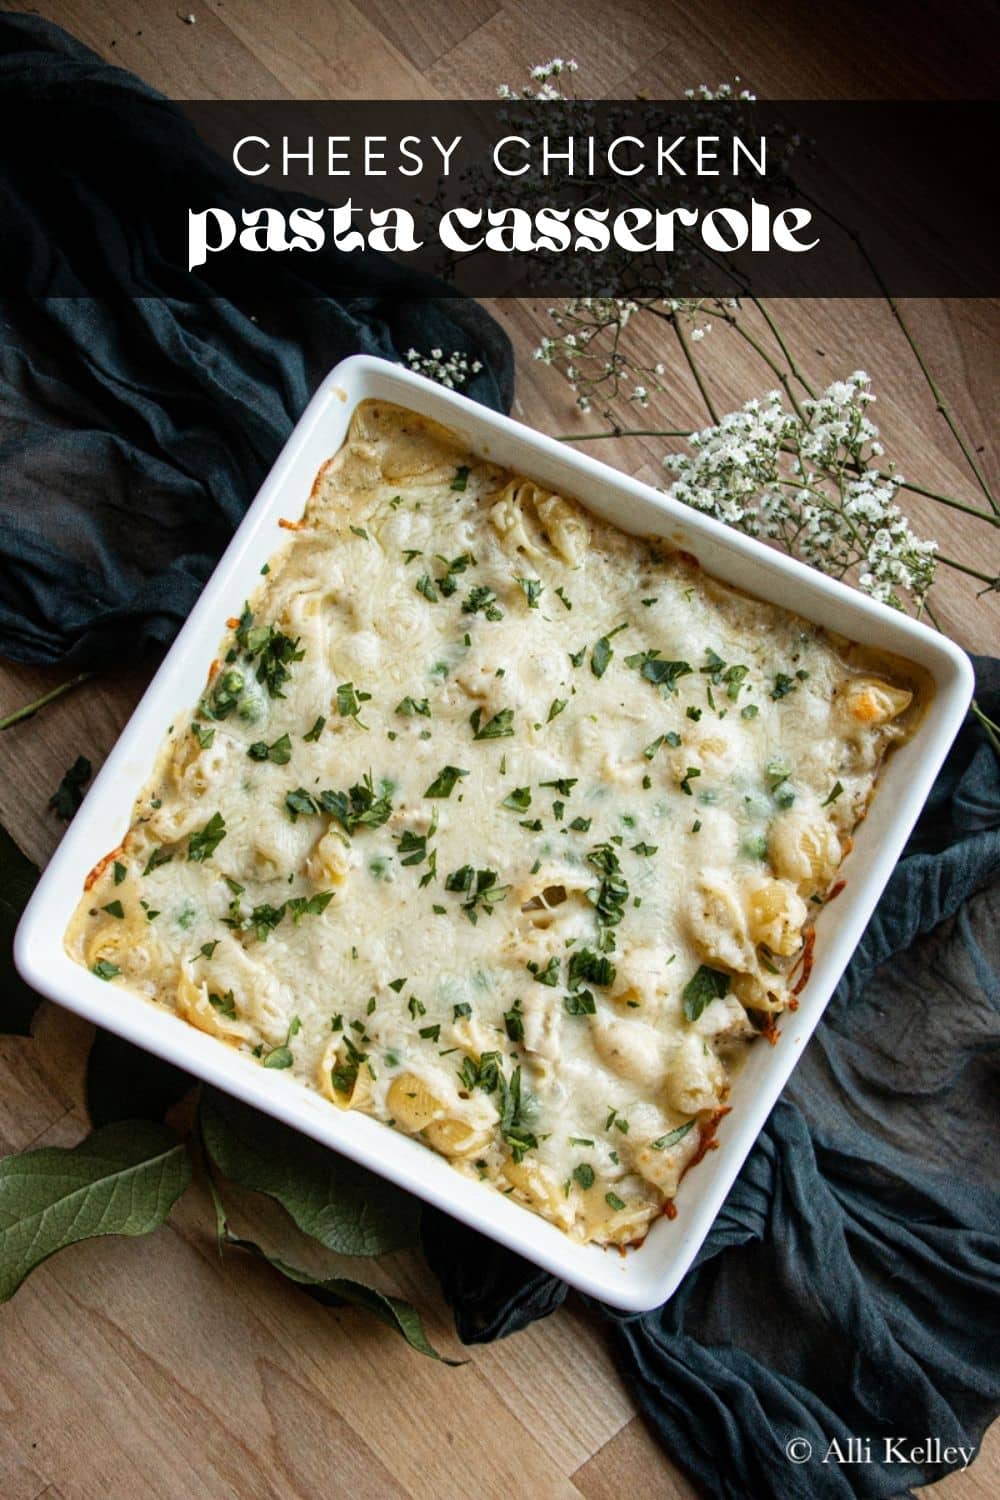 Creamy, cheesy chicken pasta casserole is one of those comforting dishes everyone will love. It's easy to make, requires minimal ingredients, and packs tons of flavor! This dish perfectly combines protein-packed chicken and hearty pasta in a creamy sauce - ideal for a cozy weeknight dinner.